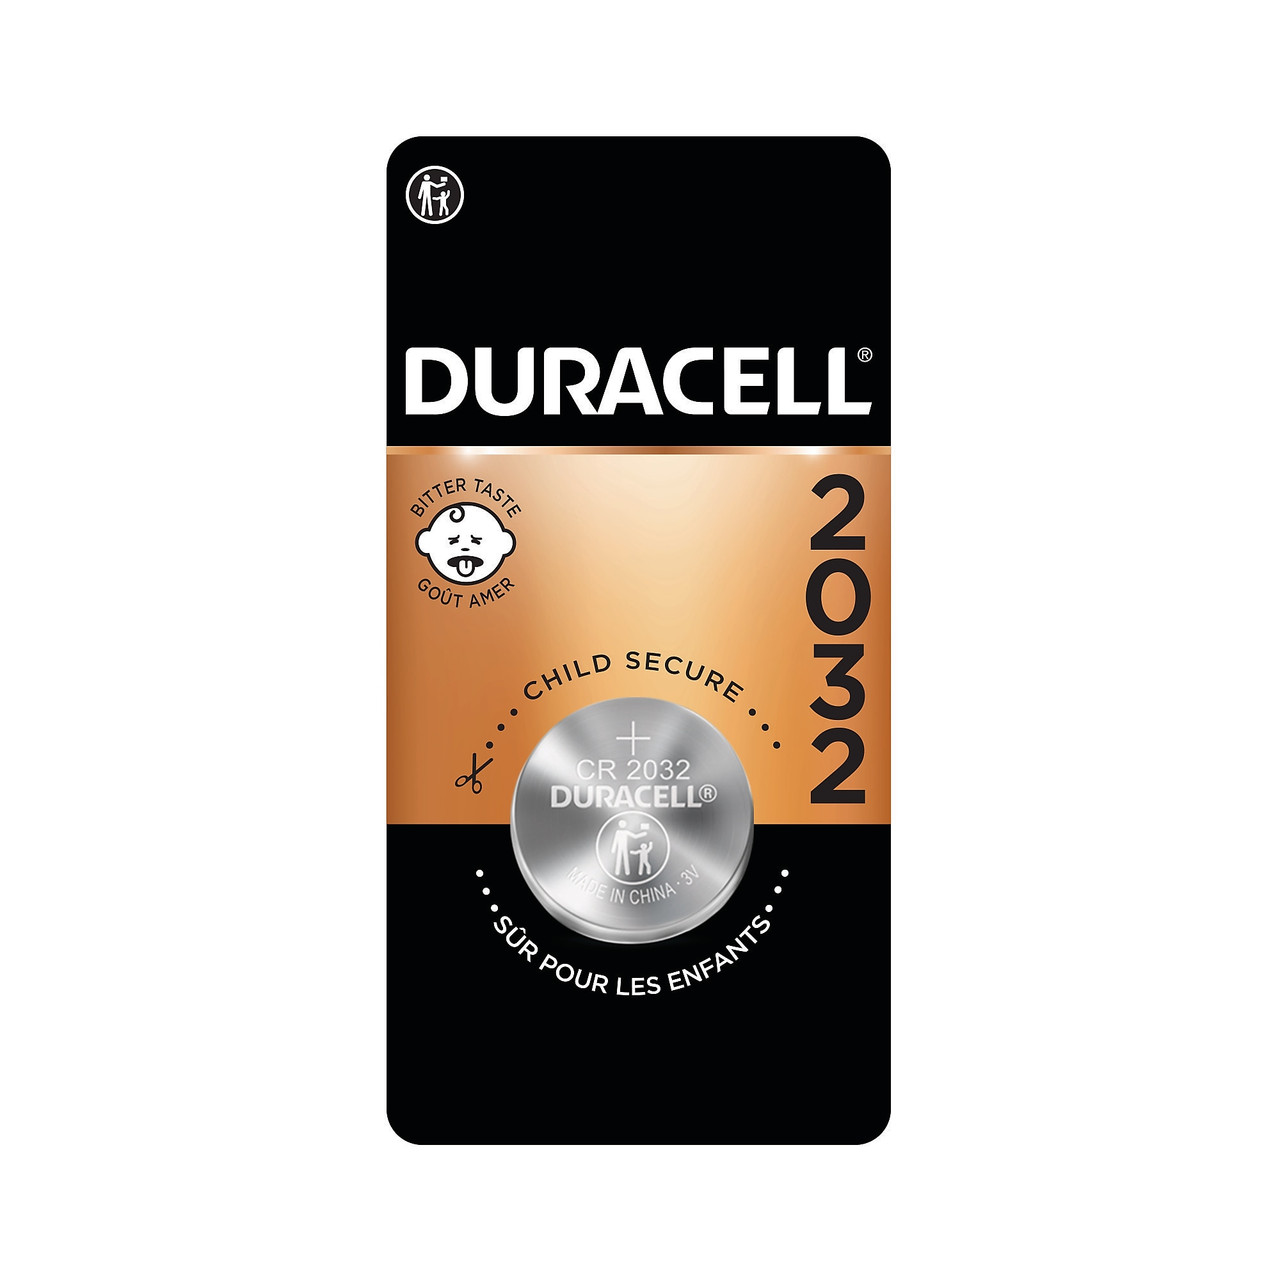 Duracell 2032 3V Lithium Coin Battery With Bitter Coating 1 Count